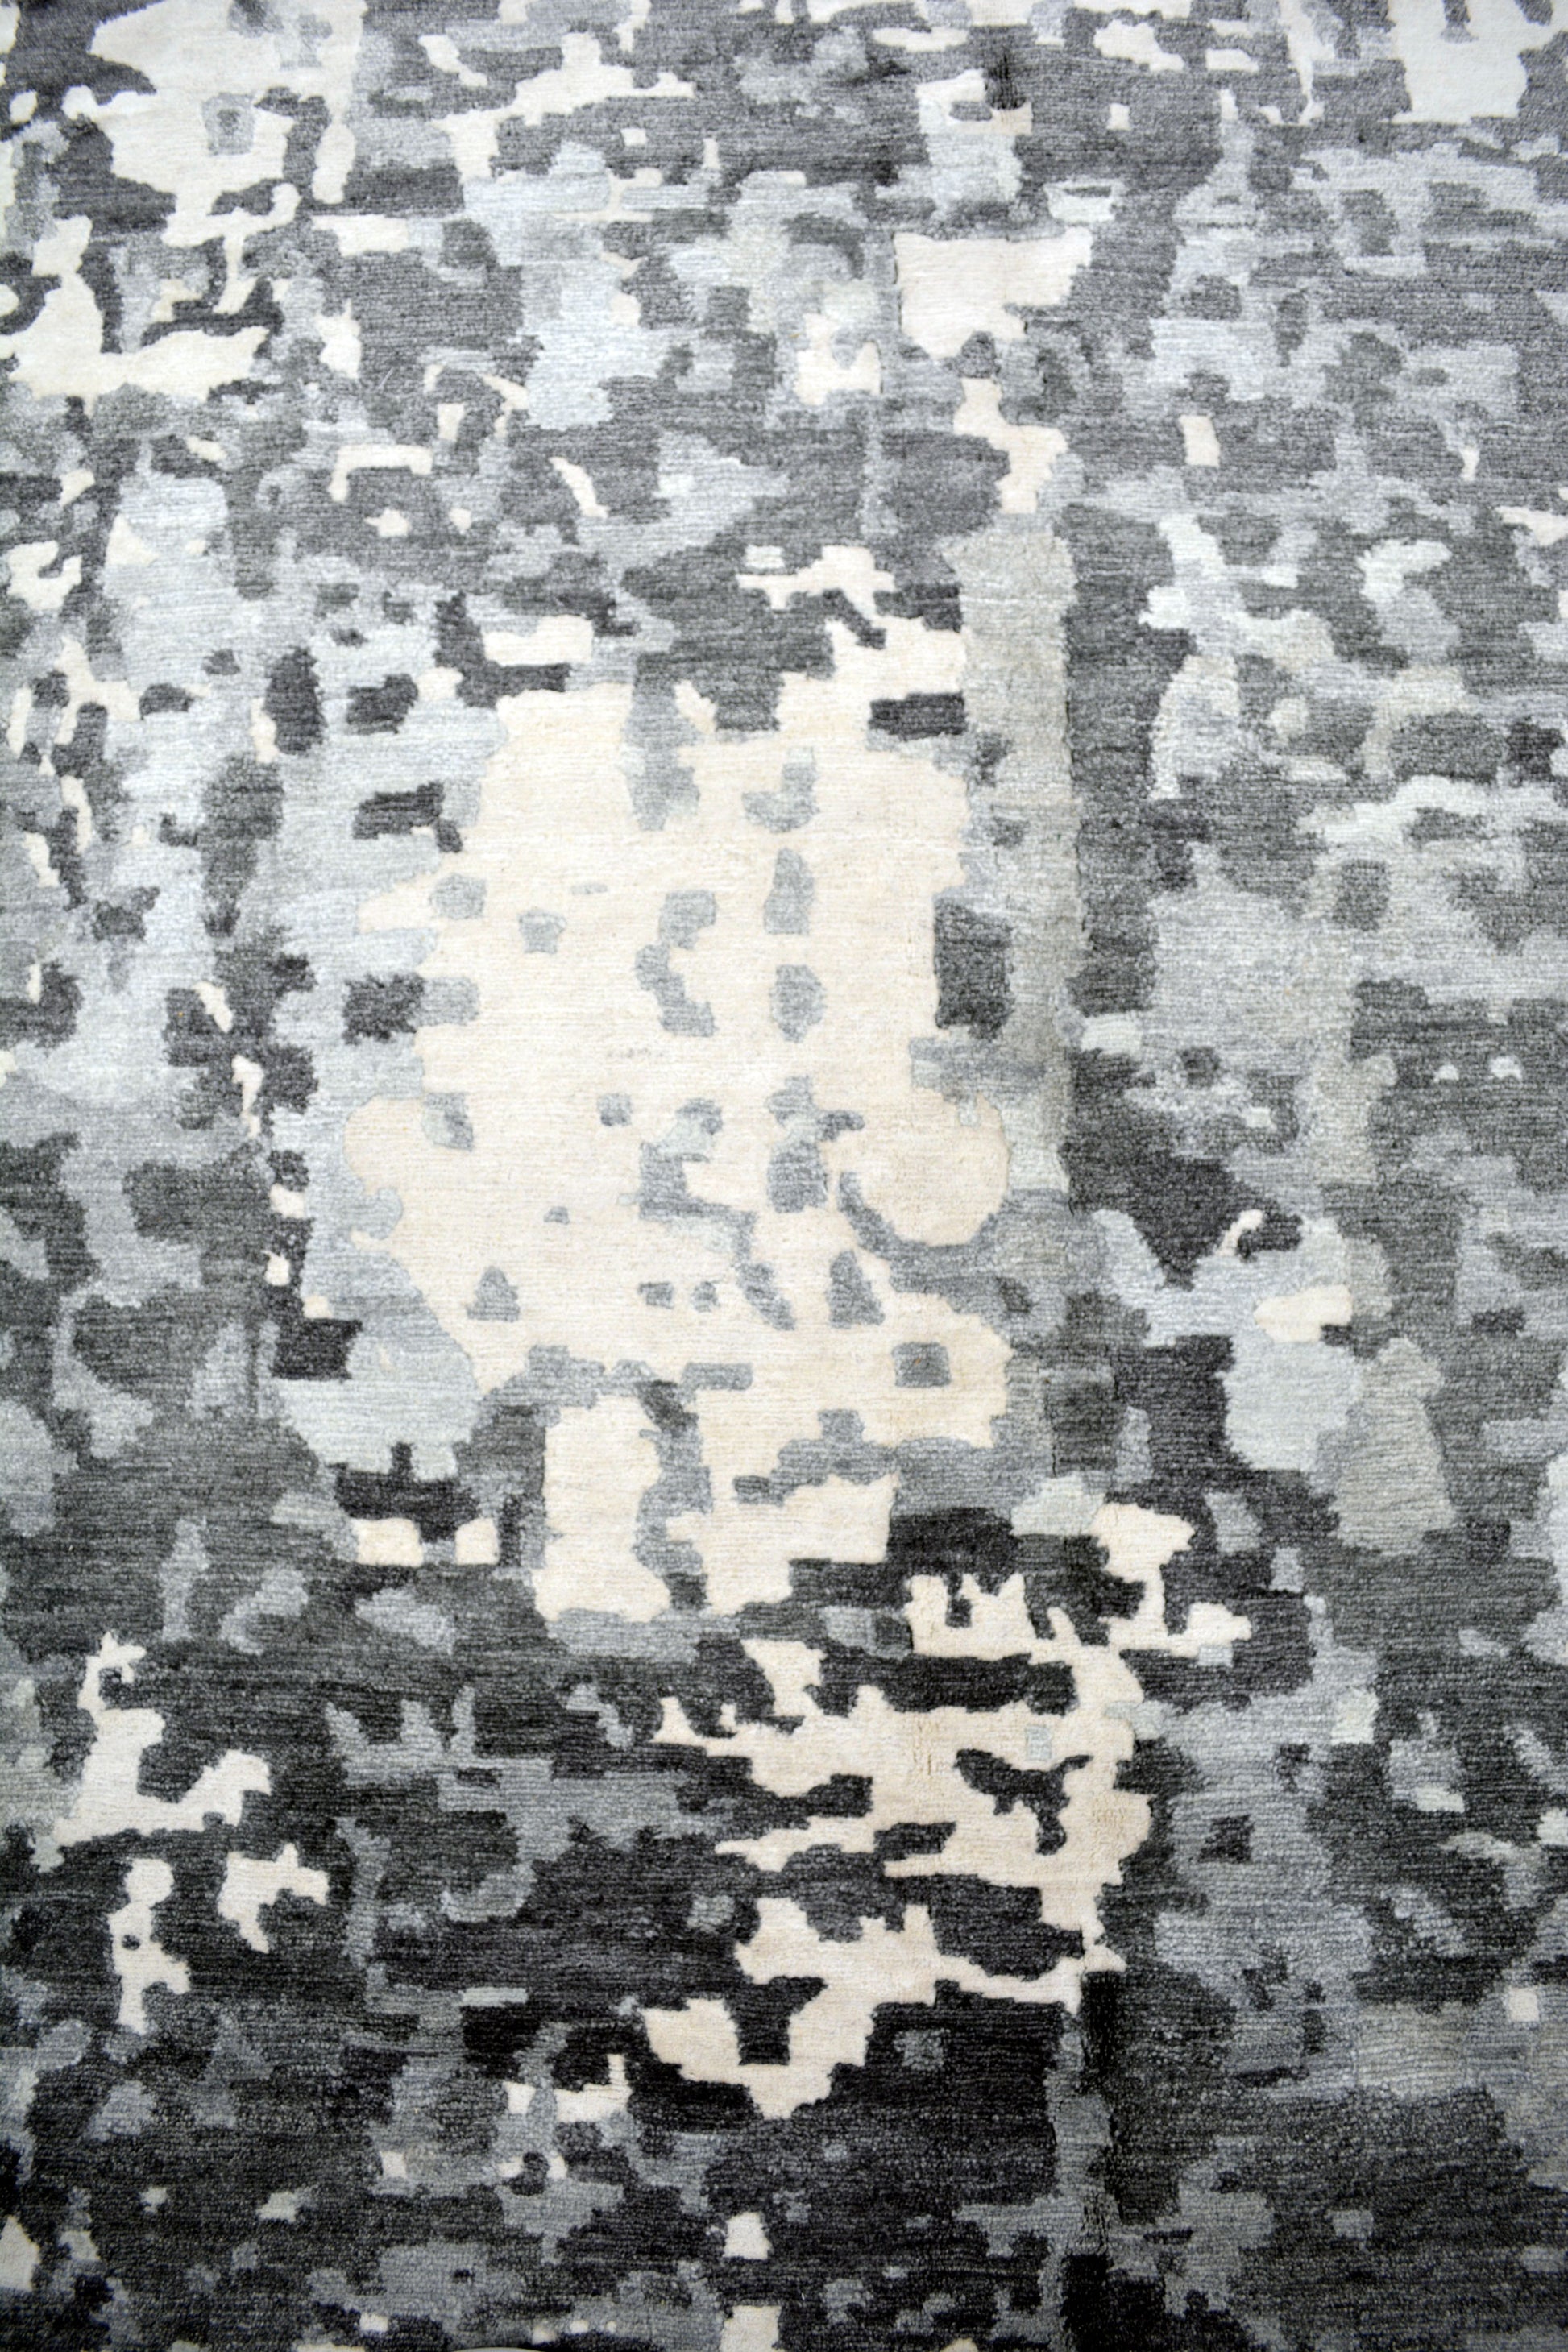 The center's close up renders the same asymmetric pattern which makes every spot over the rug unique.